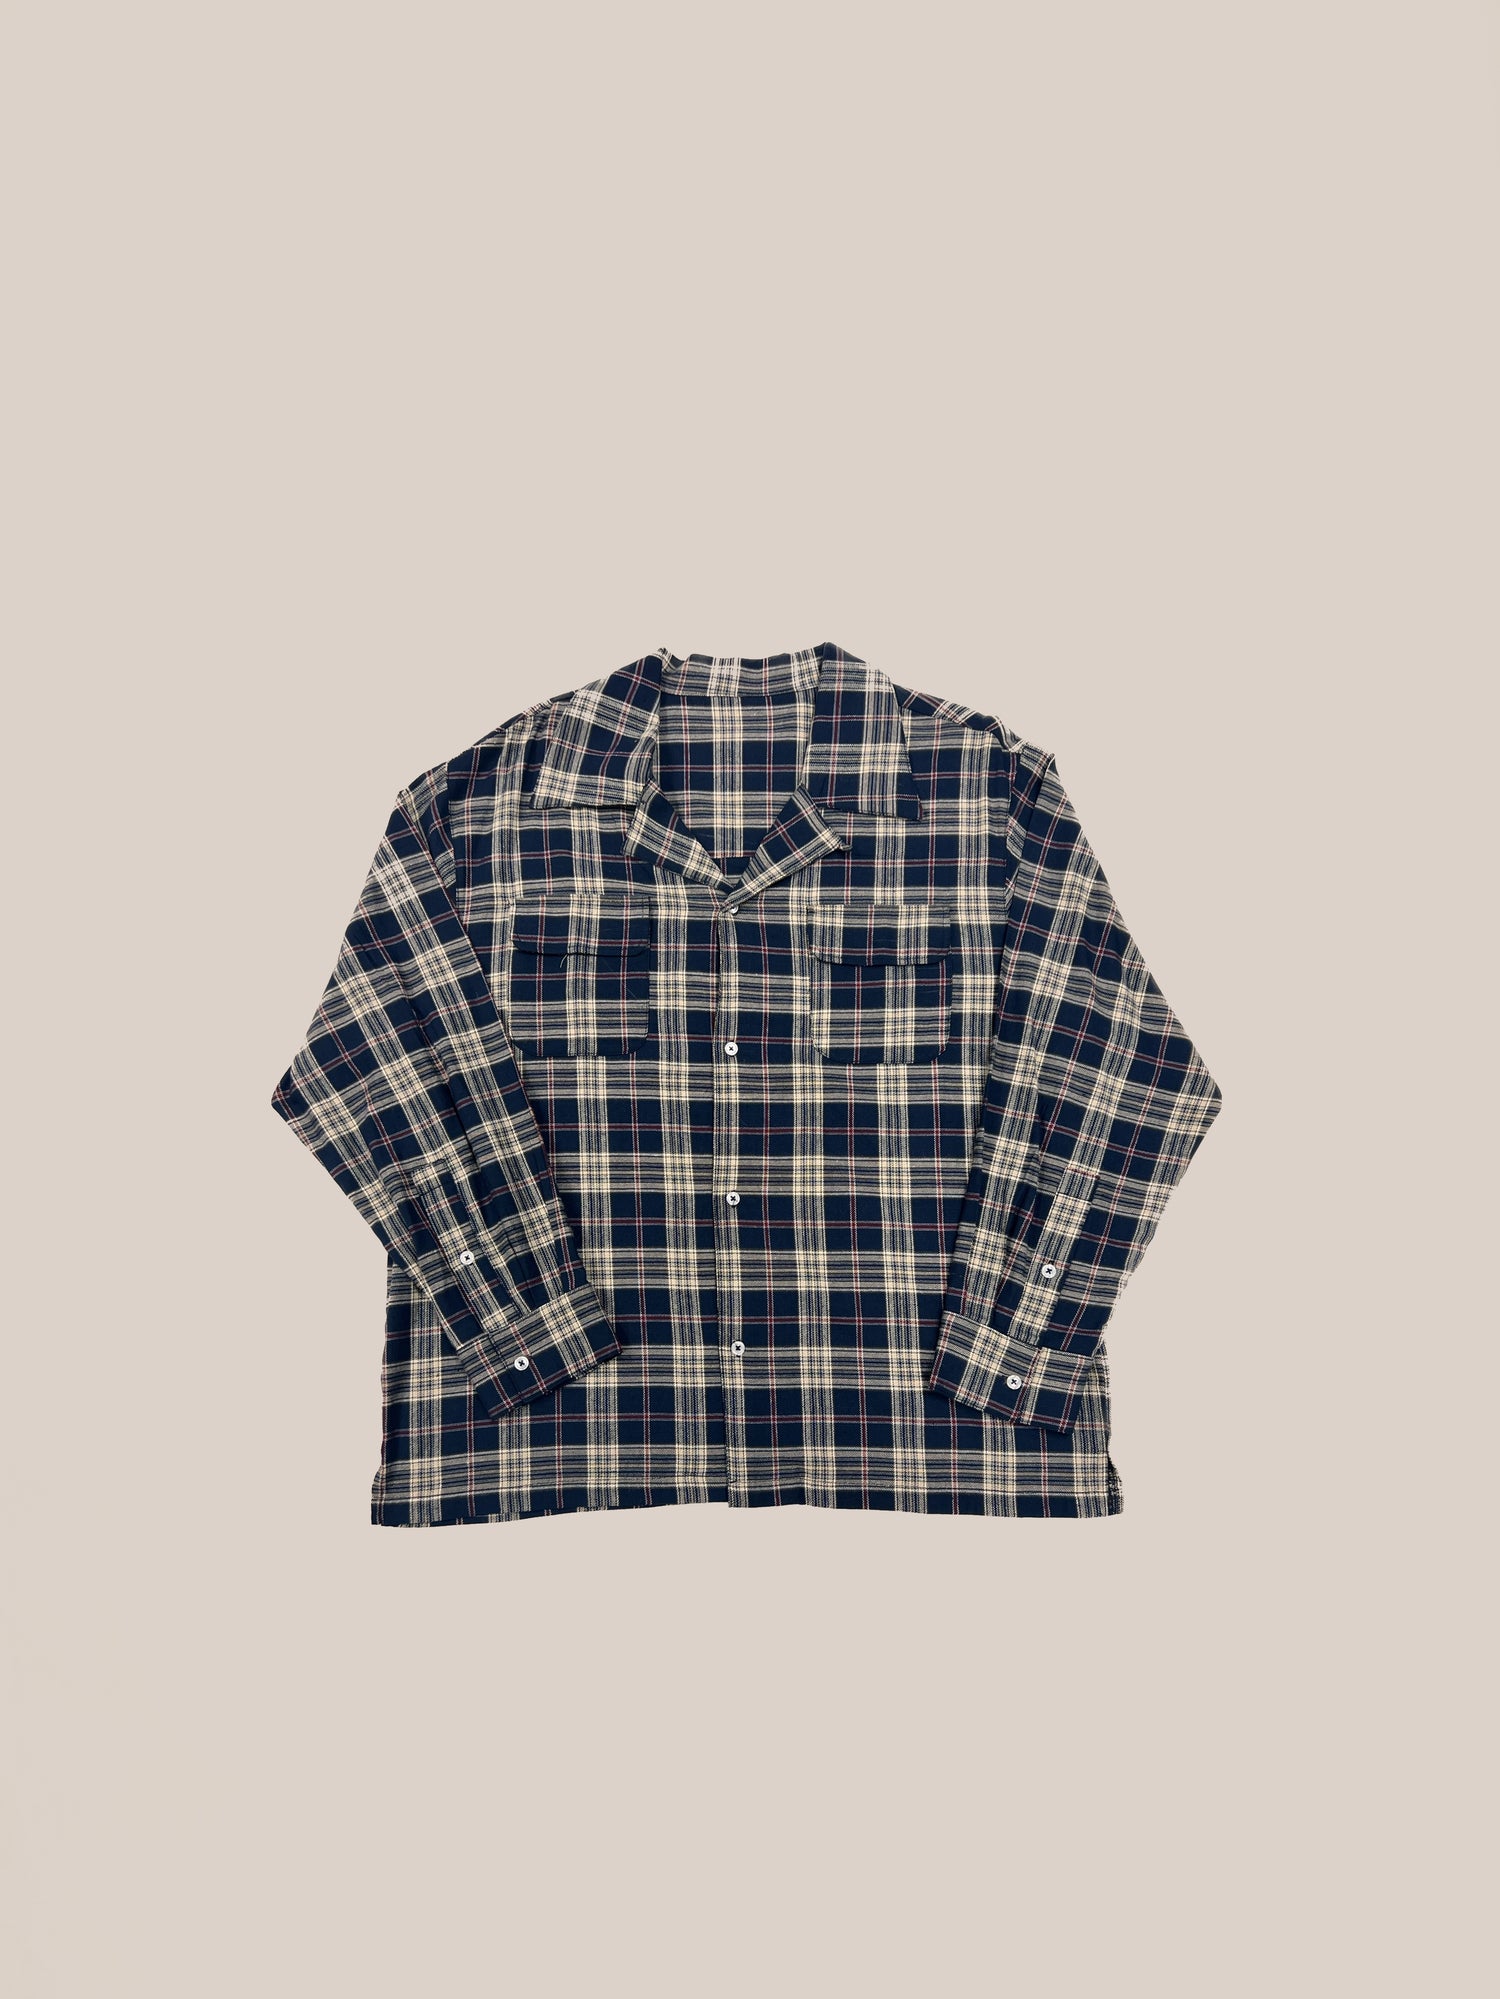 A Profound Sample 54 100% Cotton Navy Flannel Button Down shirt displayed against a plain background.